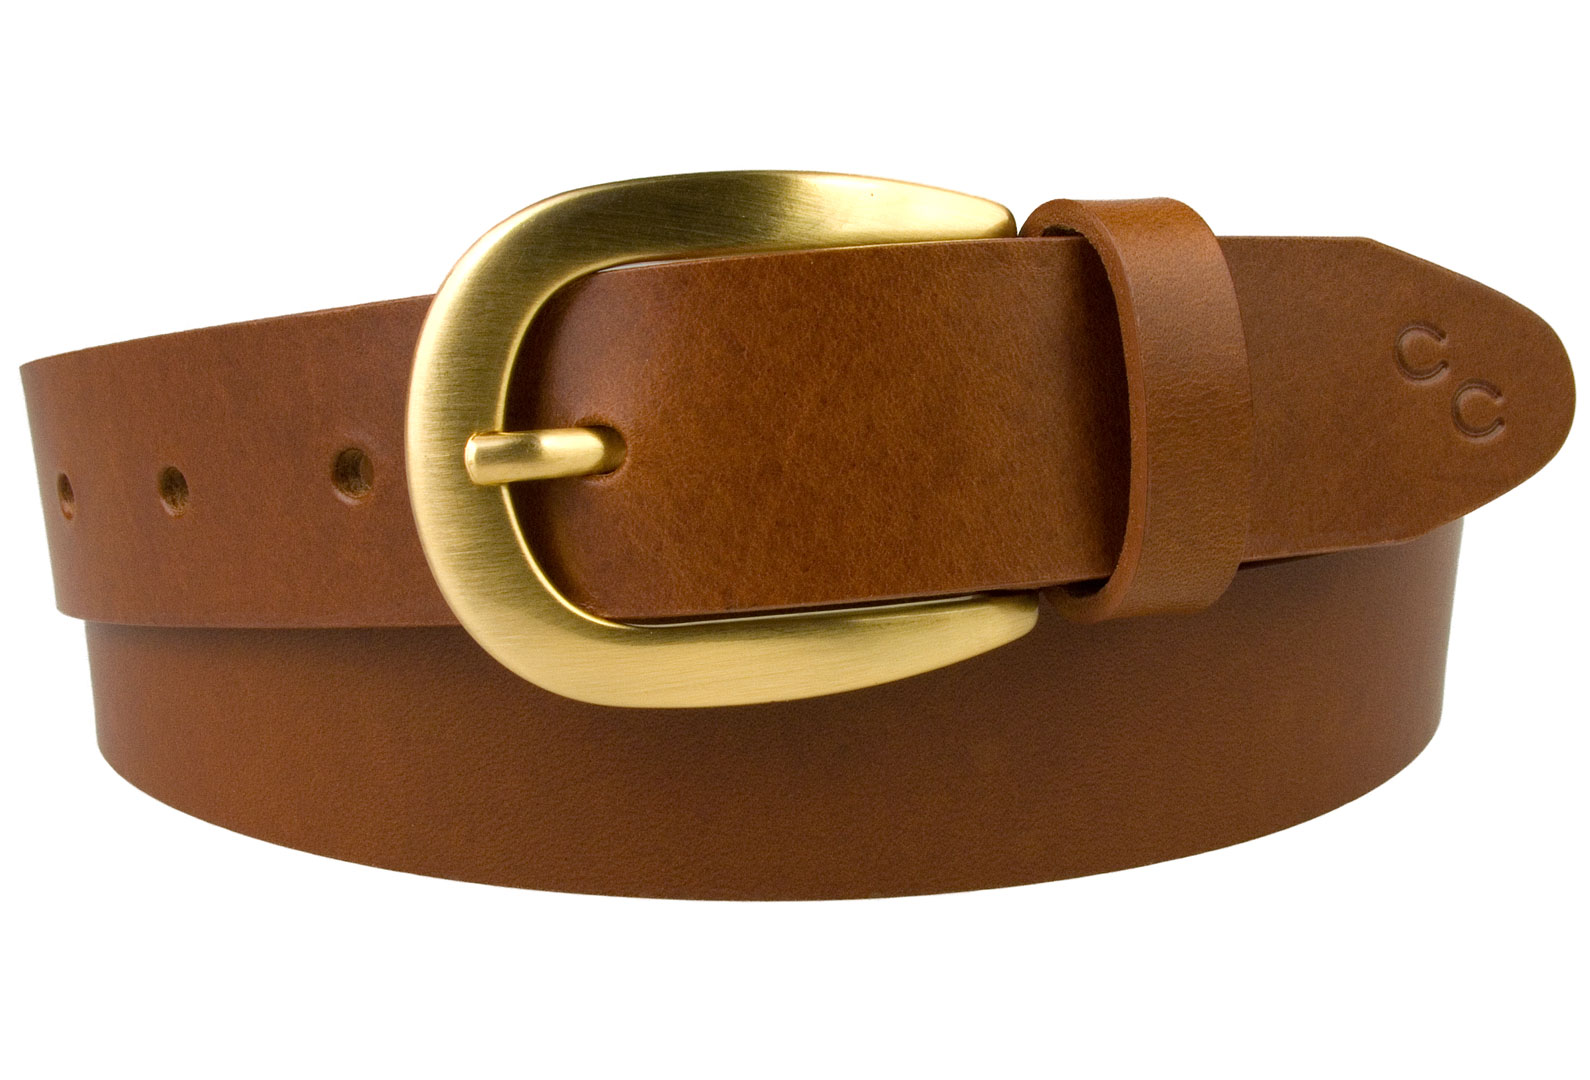 Womens Tan Leather Belt With Brushed Gold Buckle - Champion Chase